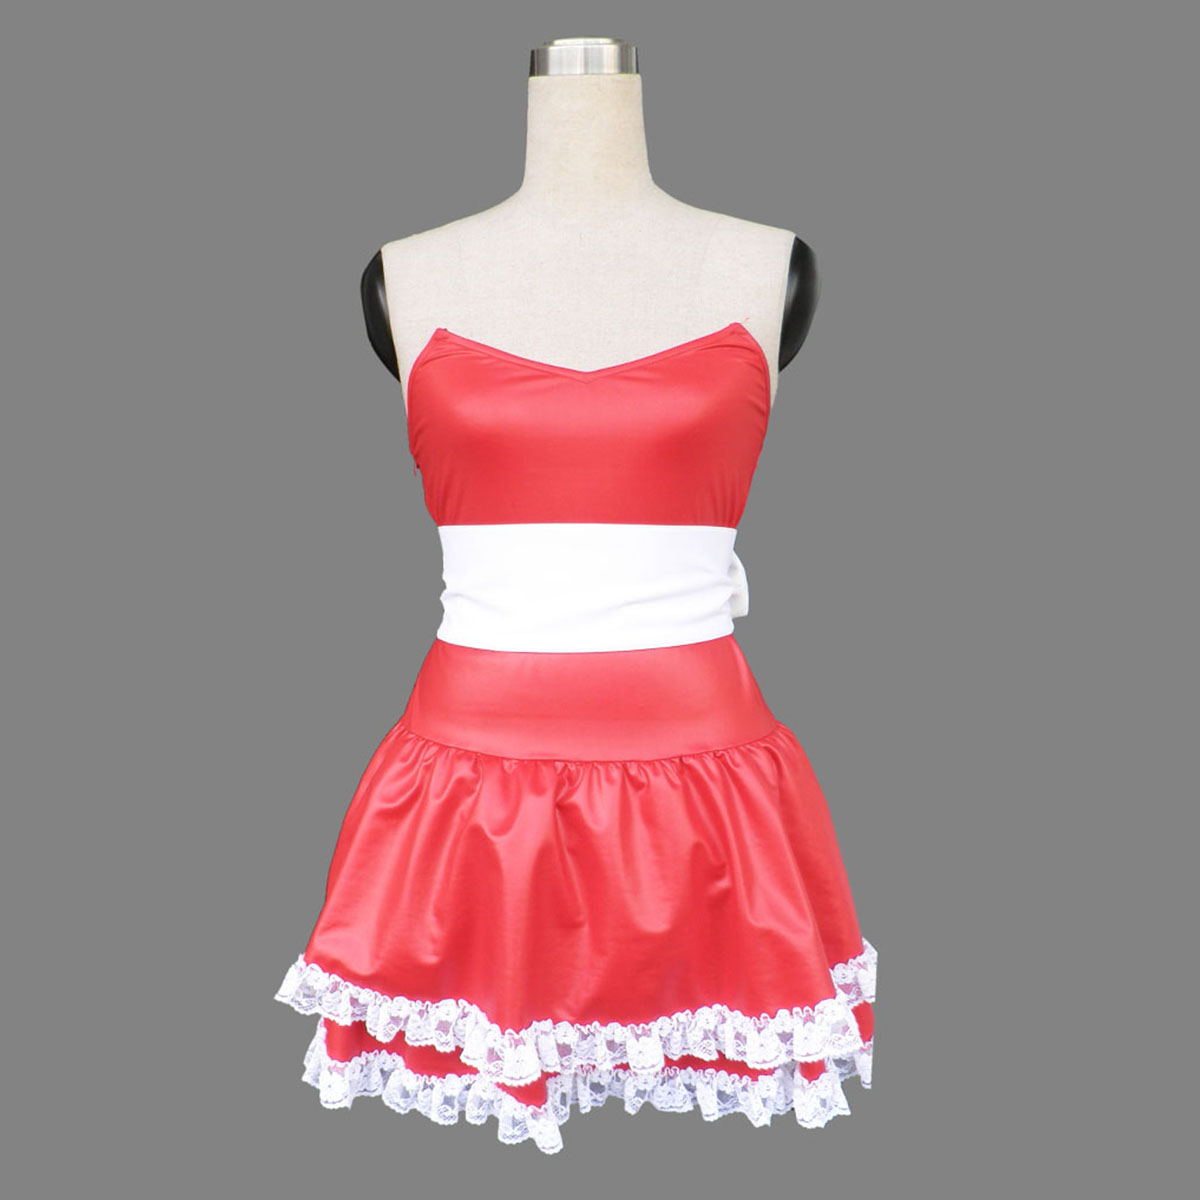 Christmas Bunny Rabbit Lady Dress 1 Anime Cosplay Costumes Outfit